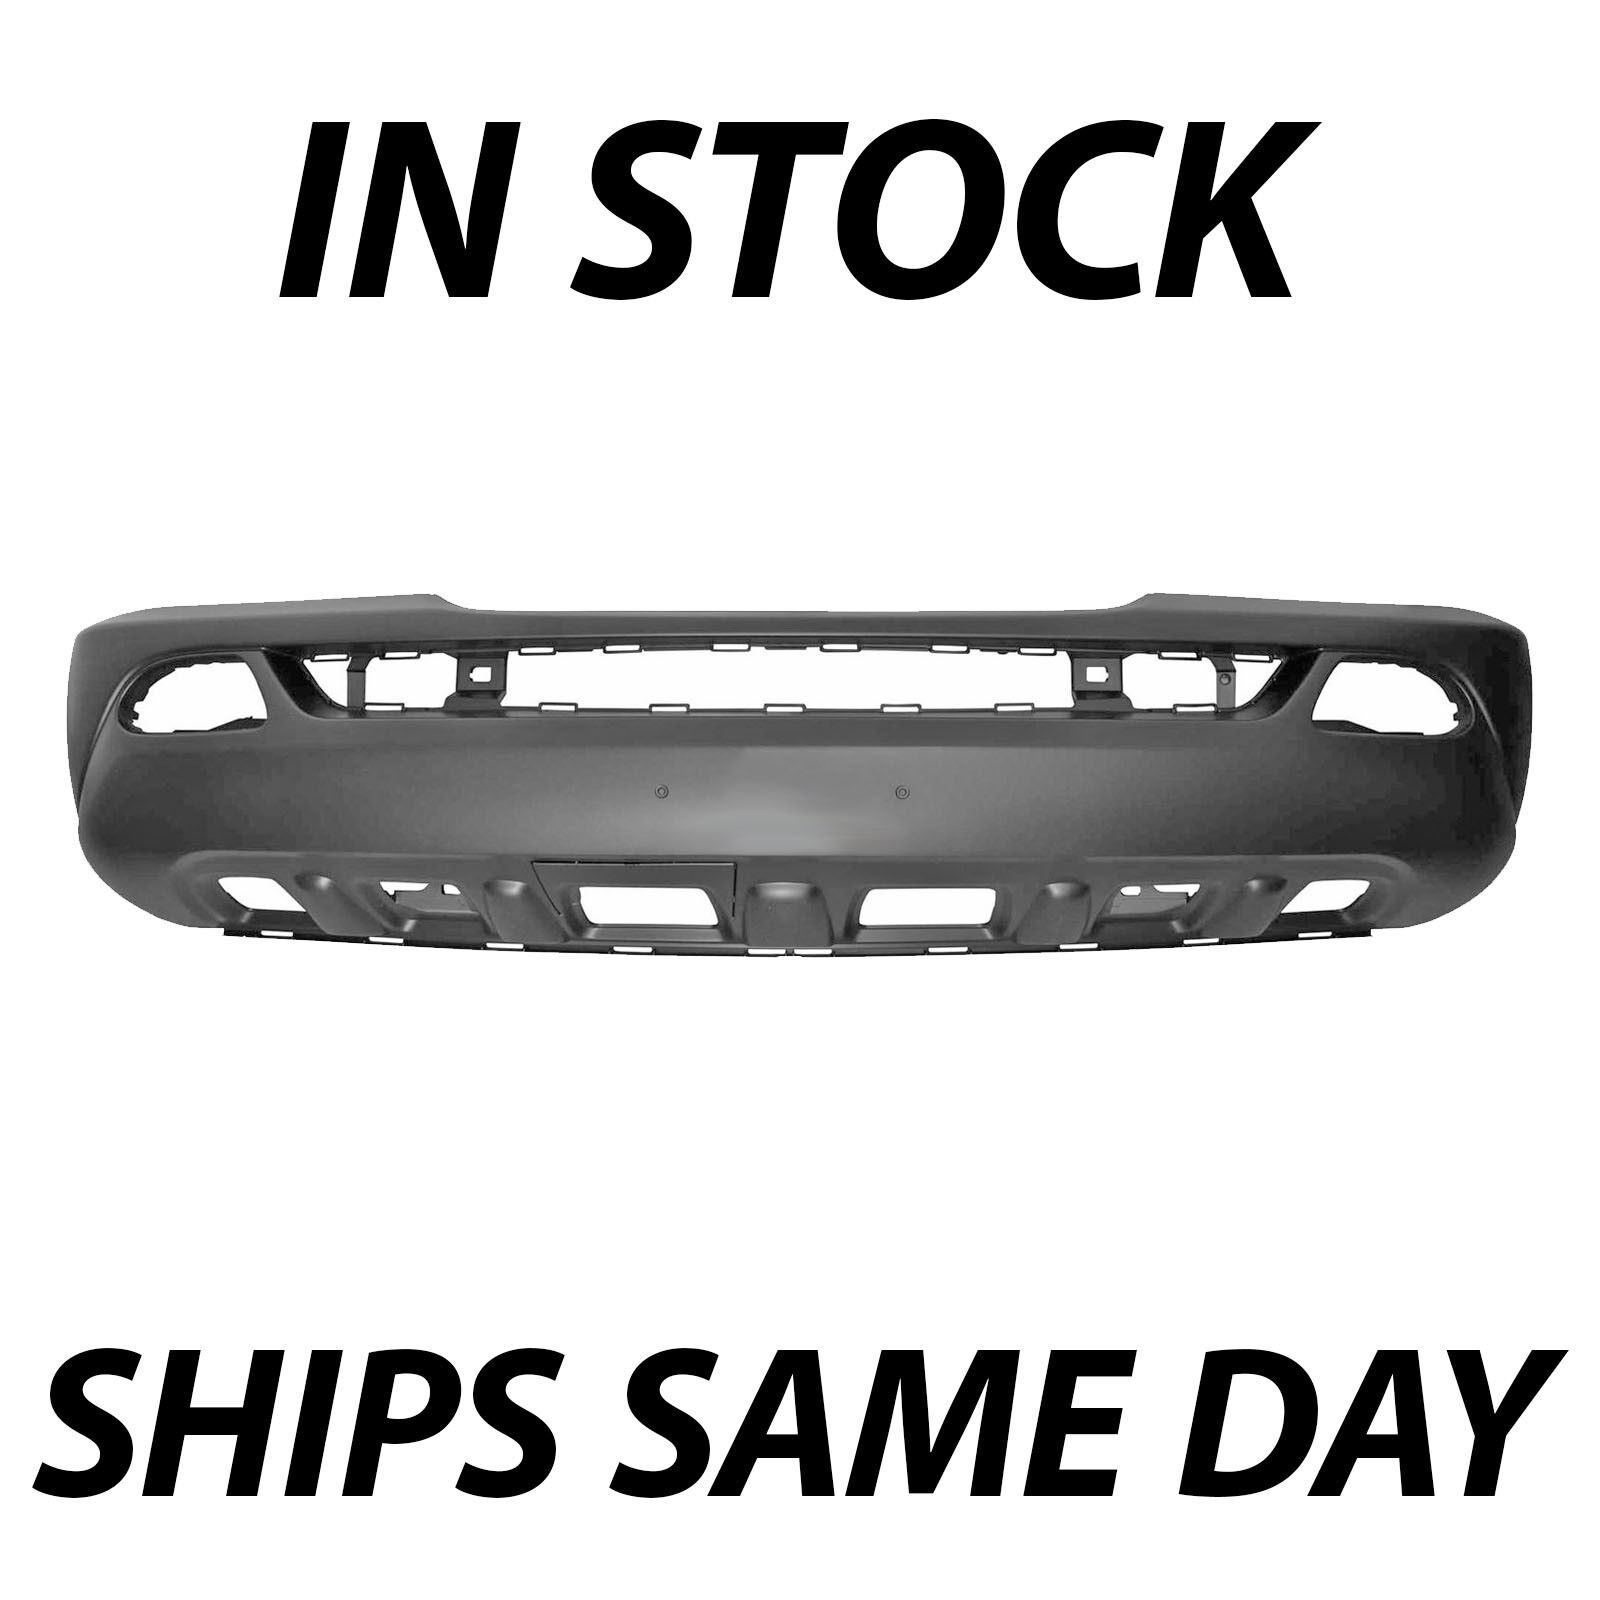 NEW Primered Front Bumper Cover Fascia for 2002-2005 Mercedes ML500 ML350 ML320